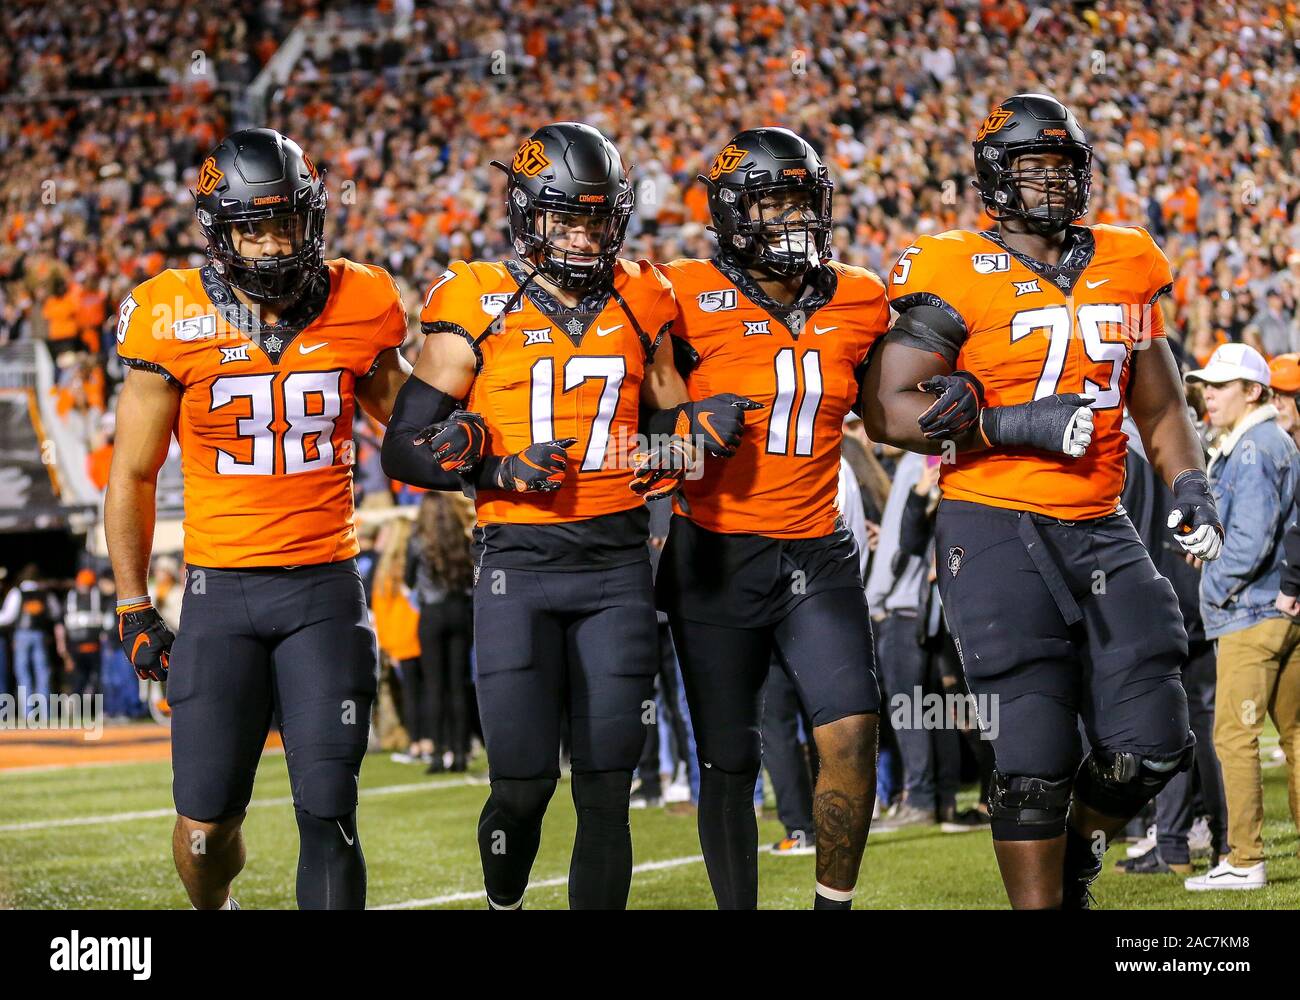 November 30, 2019: Oklahoma State teammates Philip Redwine-Bryant (38), David Thibodeaux-Benoit (17), Amen Ogbongbemiga (11), and Marcus Keyes (75) take the field before a football game between the University of Oklahoma Sooners and the Oklahoma State Cowboys at Boone Pickens Stadium in Stillwater, OK. Gray Siegel/CSM Stock Photo